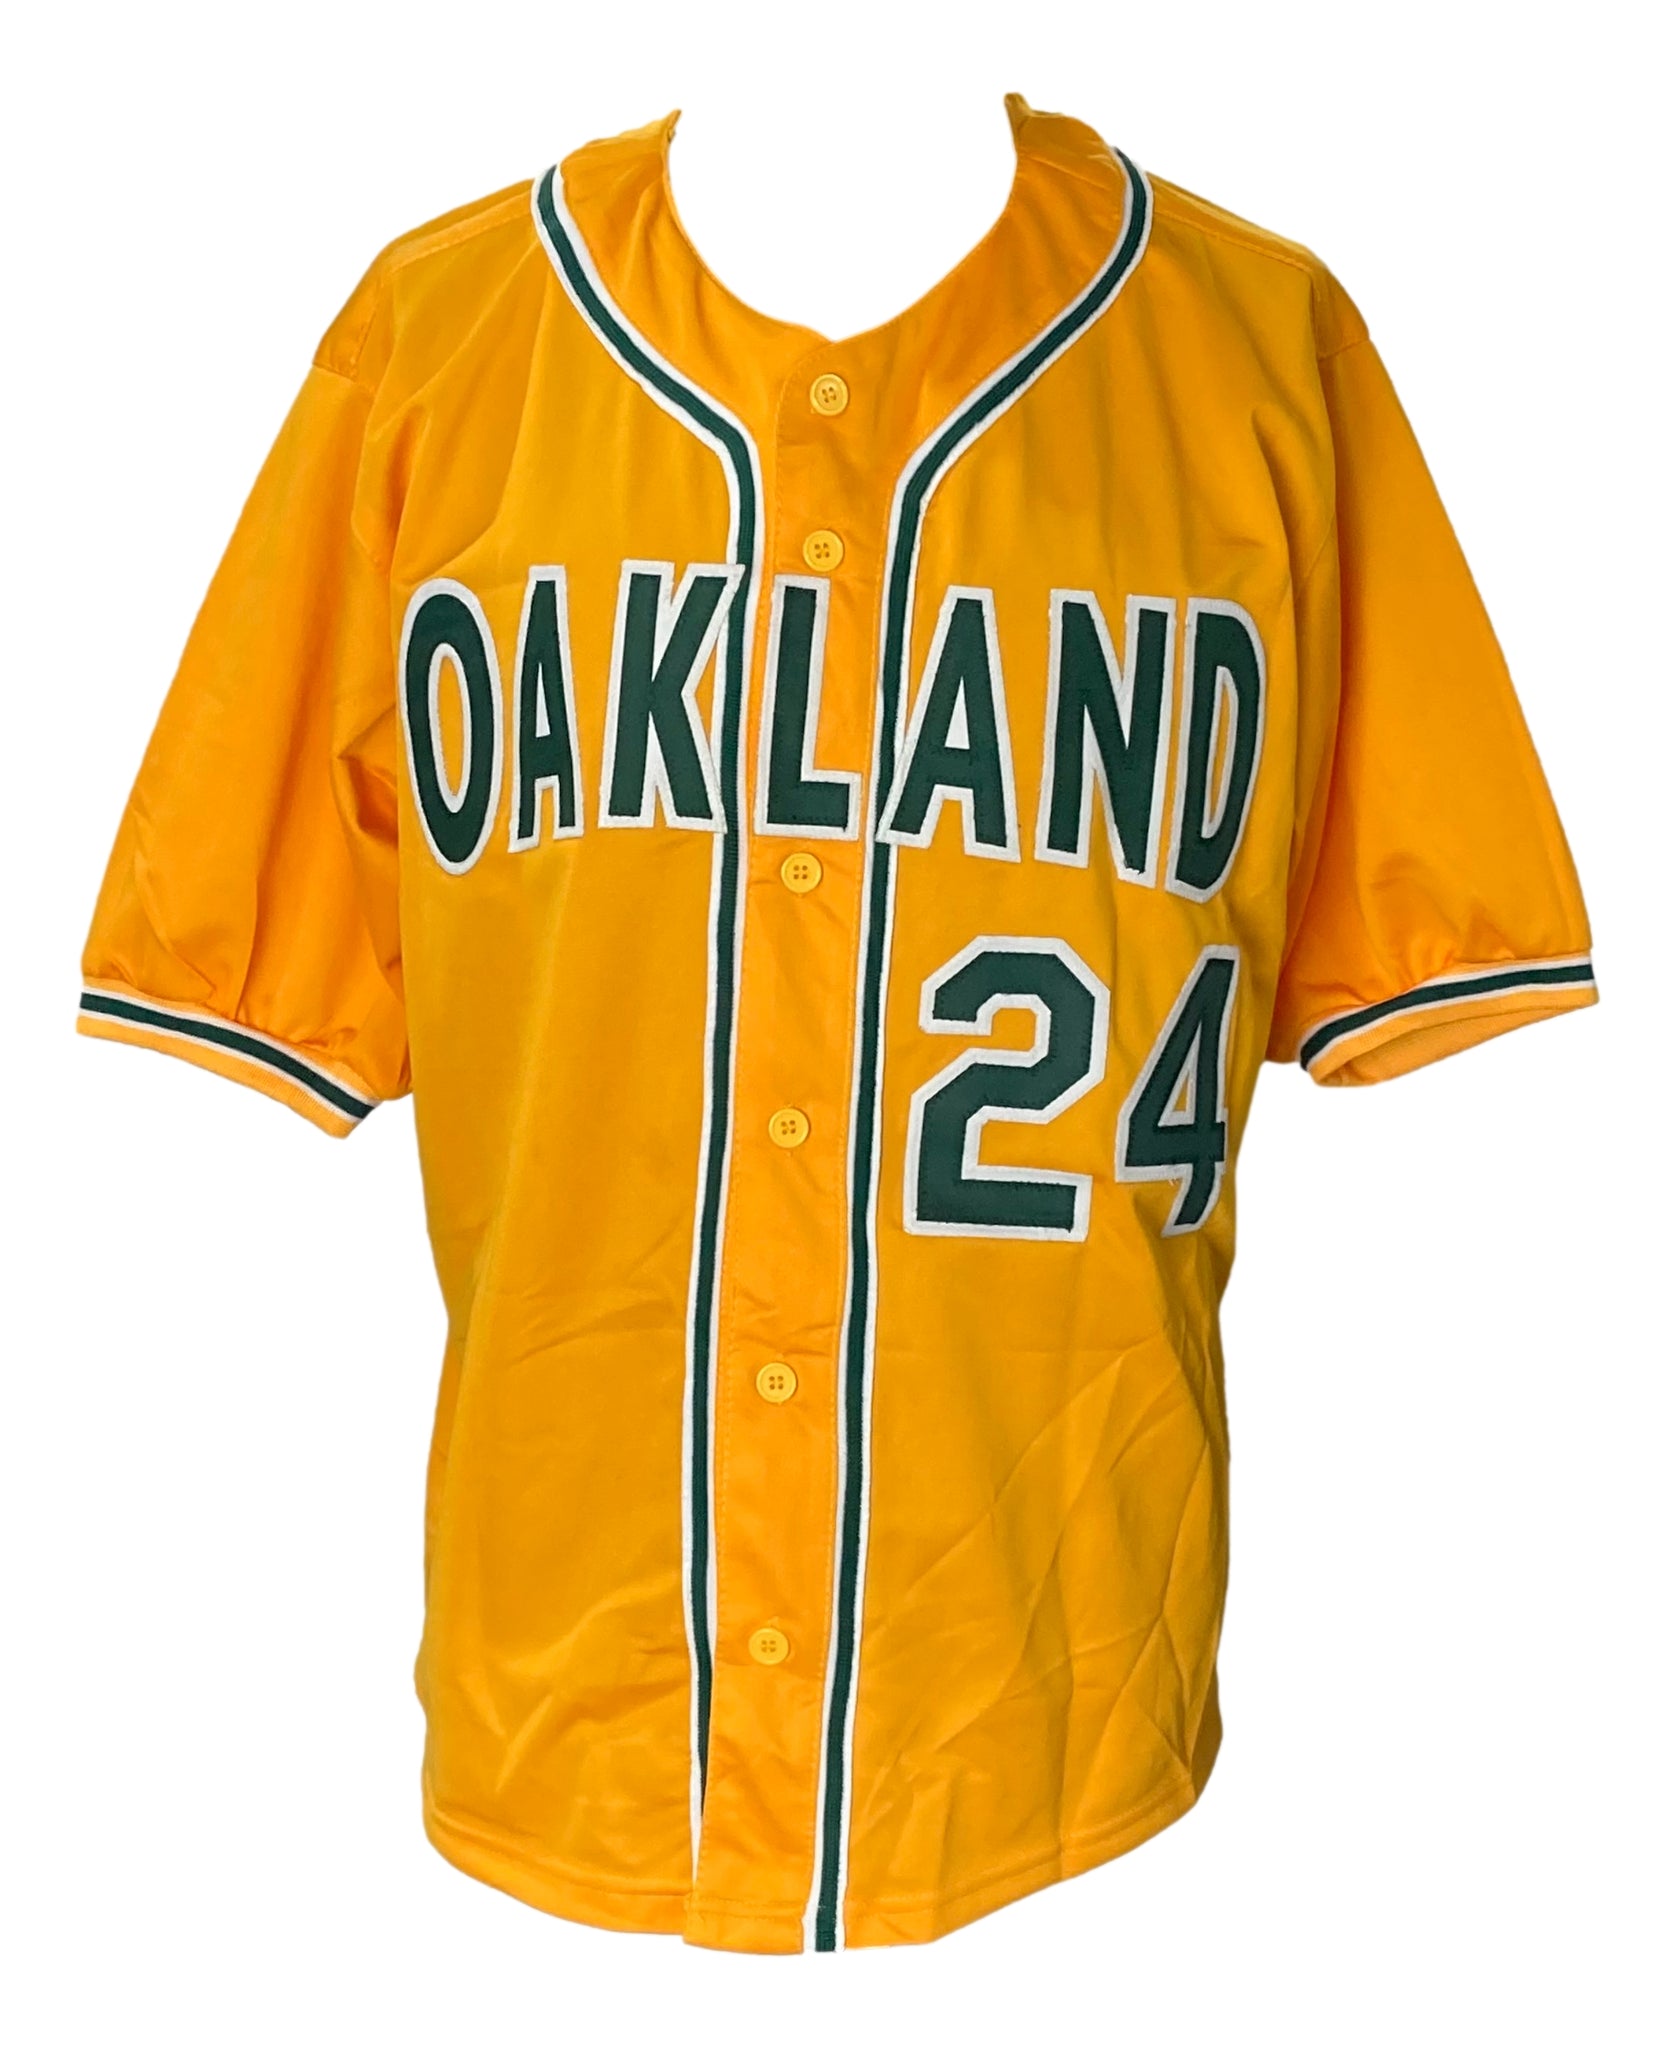 Rickey Henderson Autographed and Framed Yellow Oakland Athletics Jersey